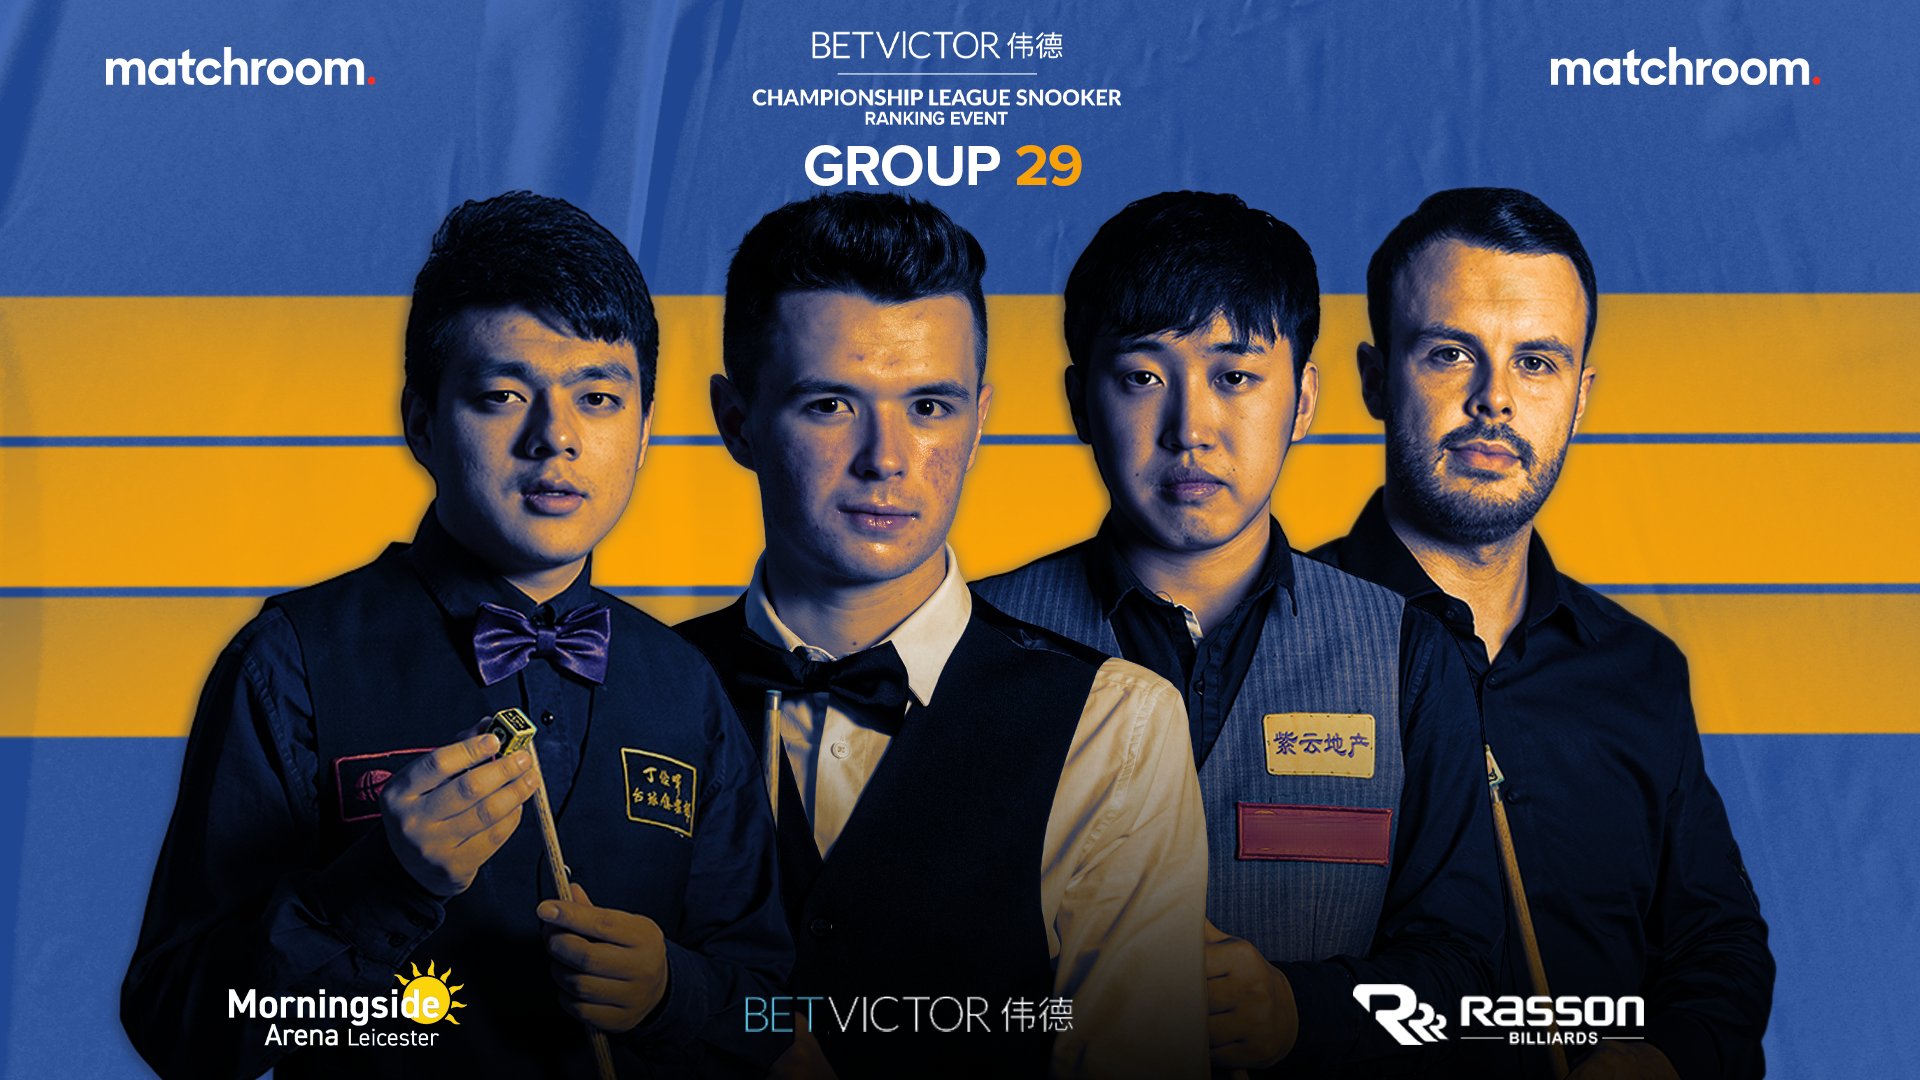 BetVictor Championship League Snooker on Twitter